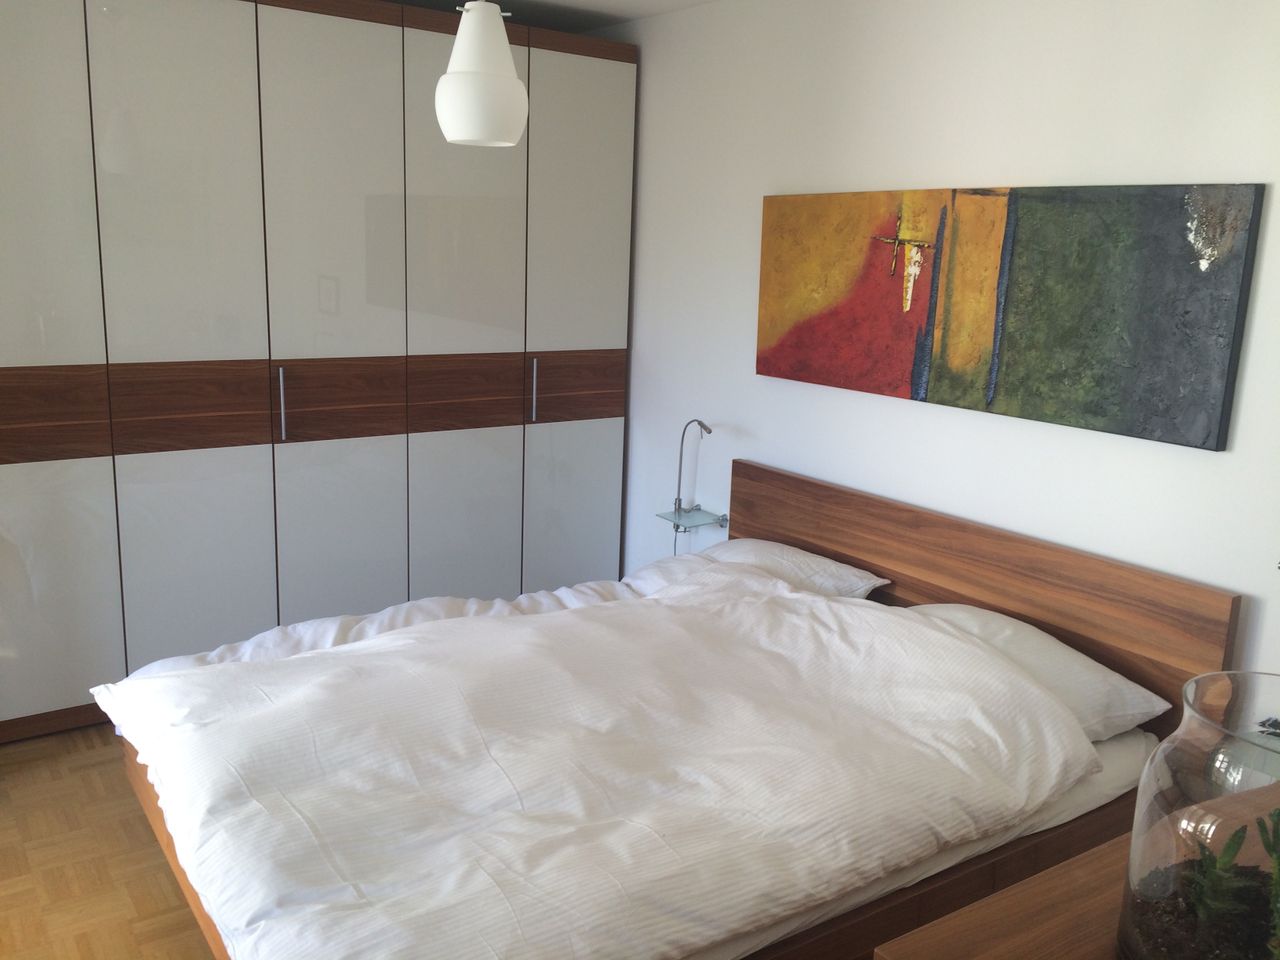 Exclusive Flat in centrally located 'Alt'Sendling/ Munich, 2 sep. entrances, fully equipped